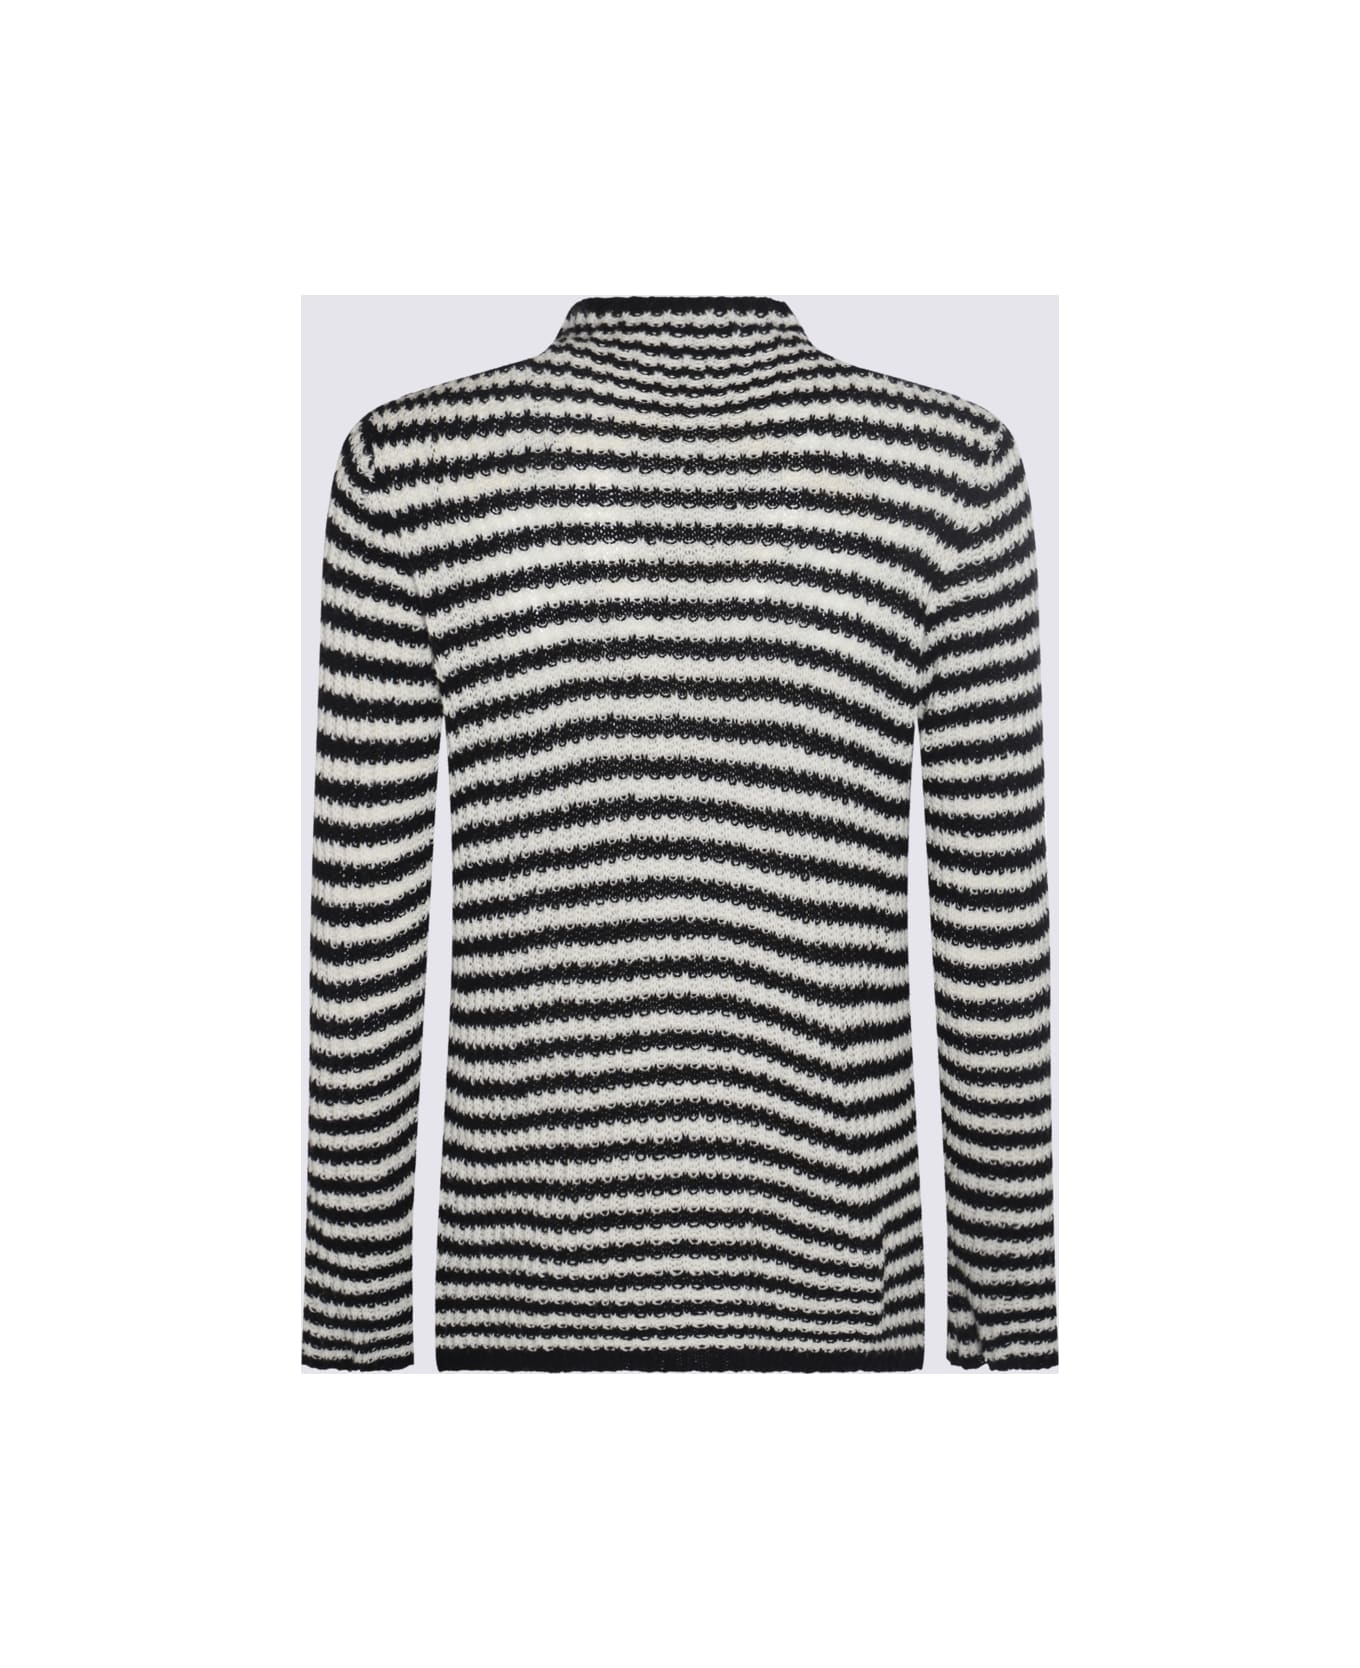 Dries Van Noten White And Black Wool And Cashmere Sweater - White ニットウェア